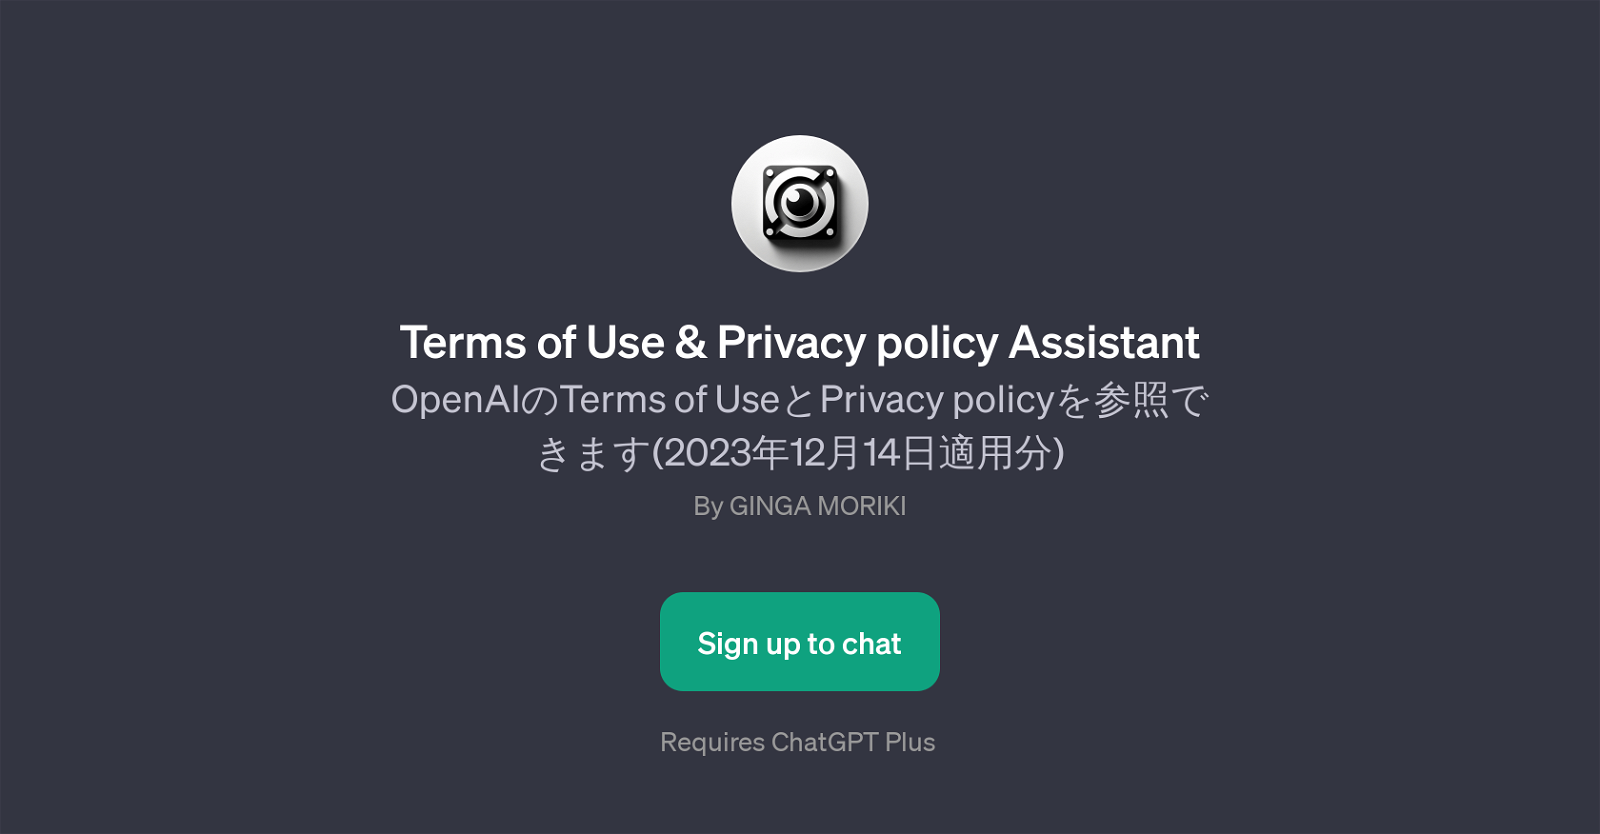 Terms of Use & Privacy policy Assistant website